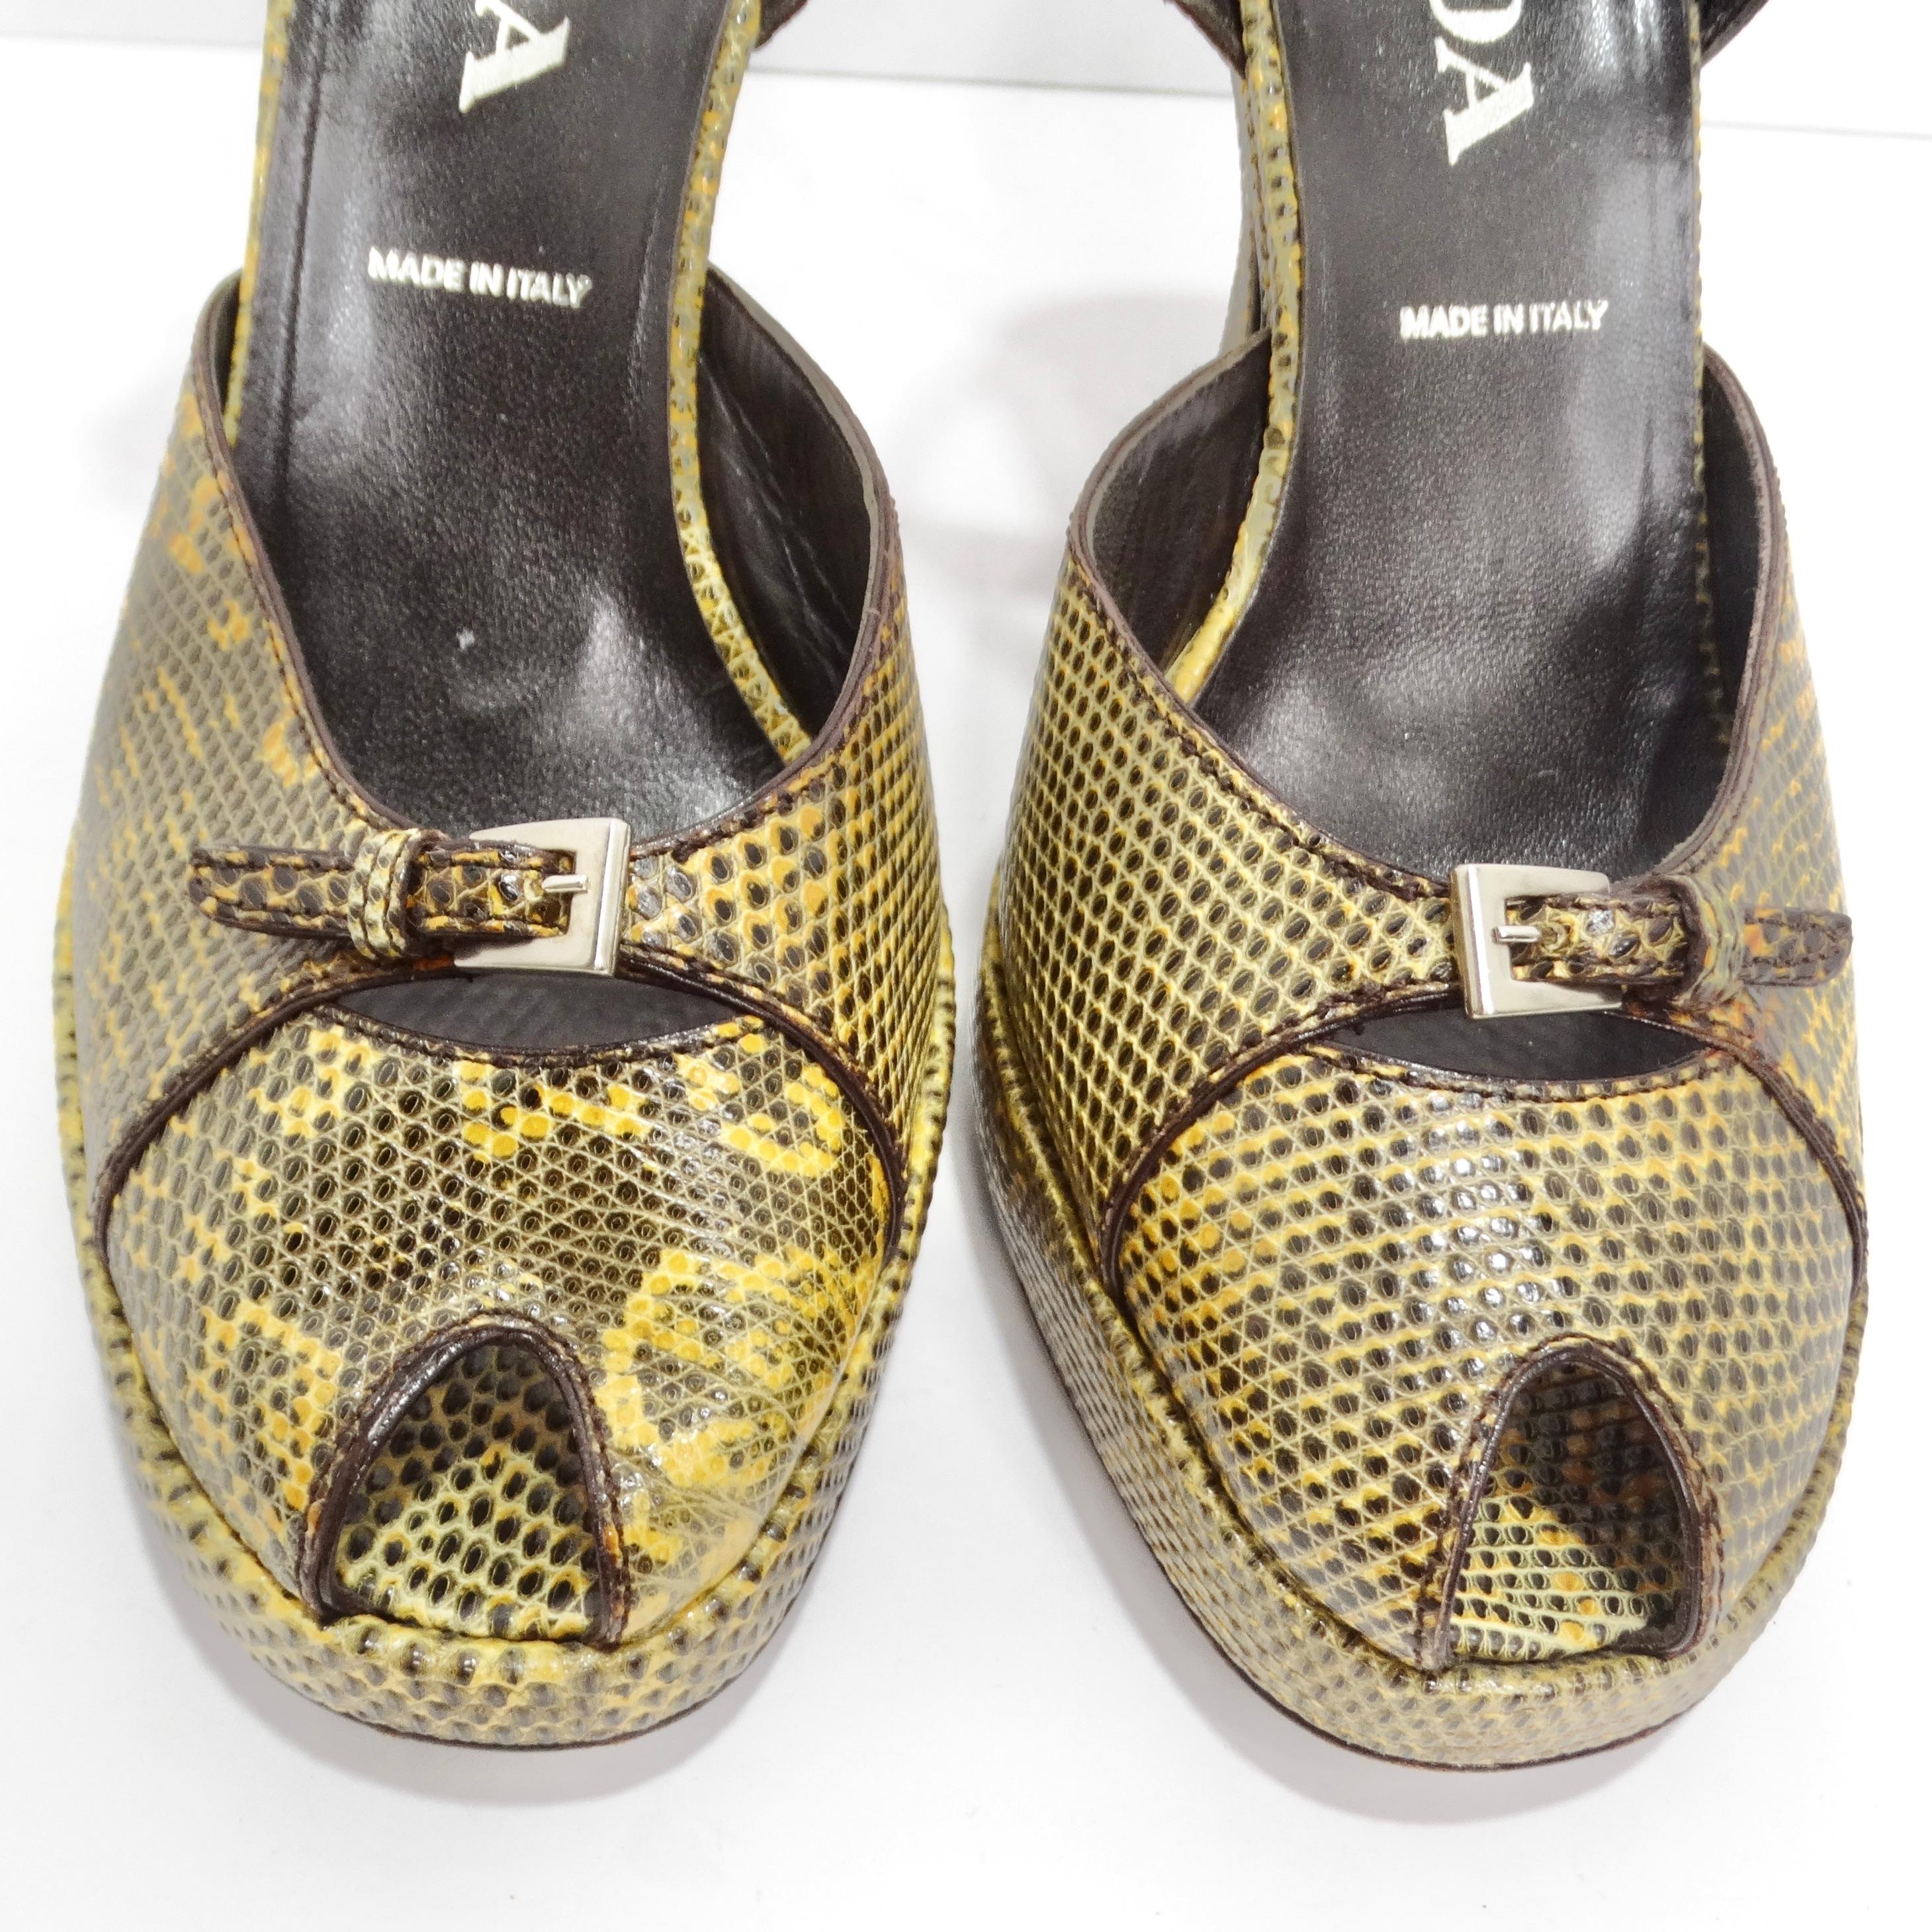 Prada 1990s Embossed Buckle Platforms In Good Condition For Sale In Scottsdale, AZ